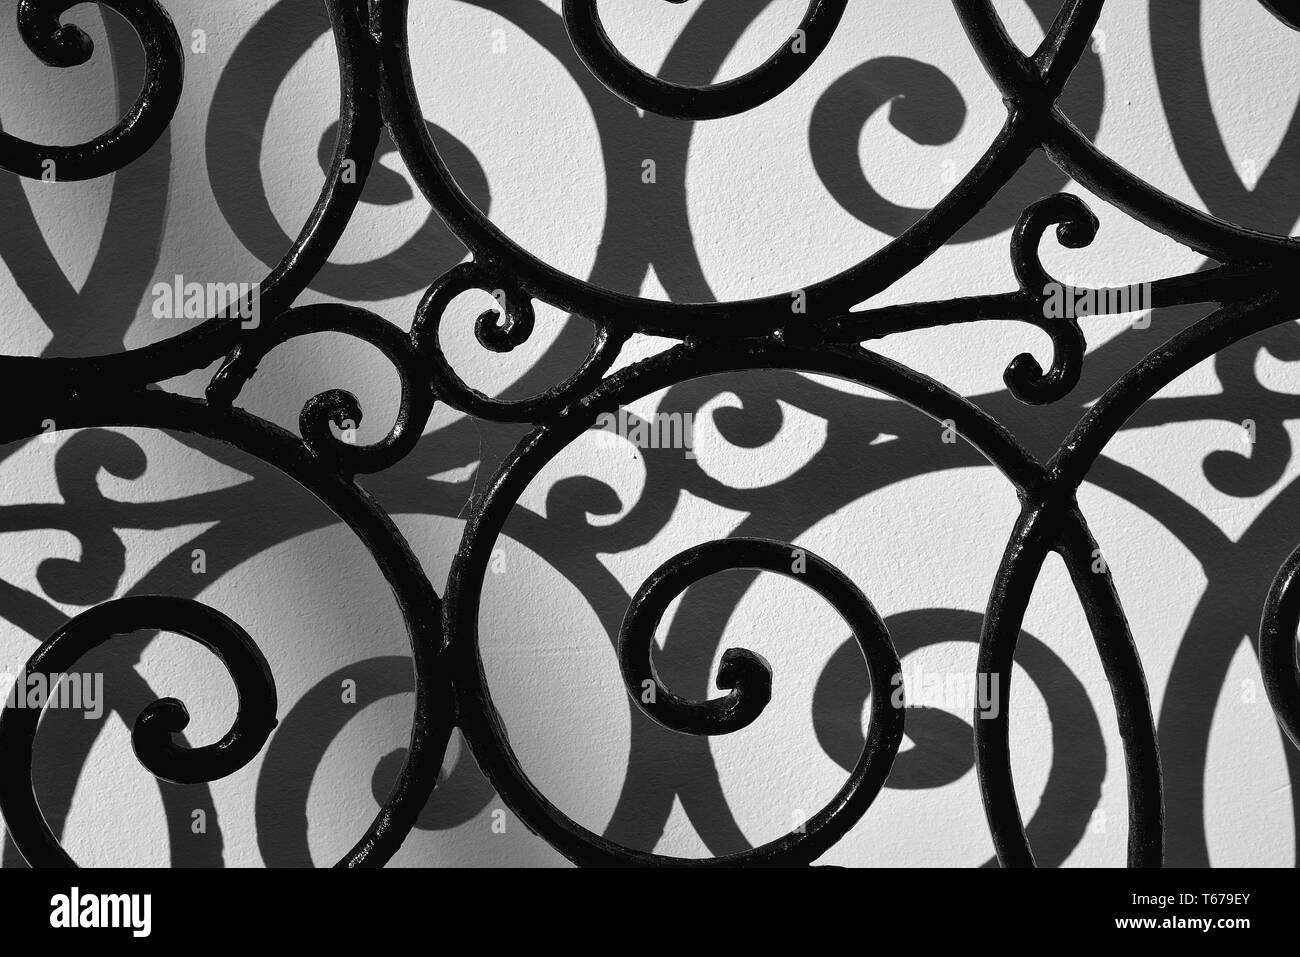 Curved iron bars casting shadows on wall. Stock Photo